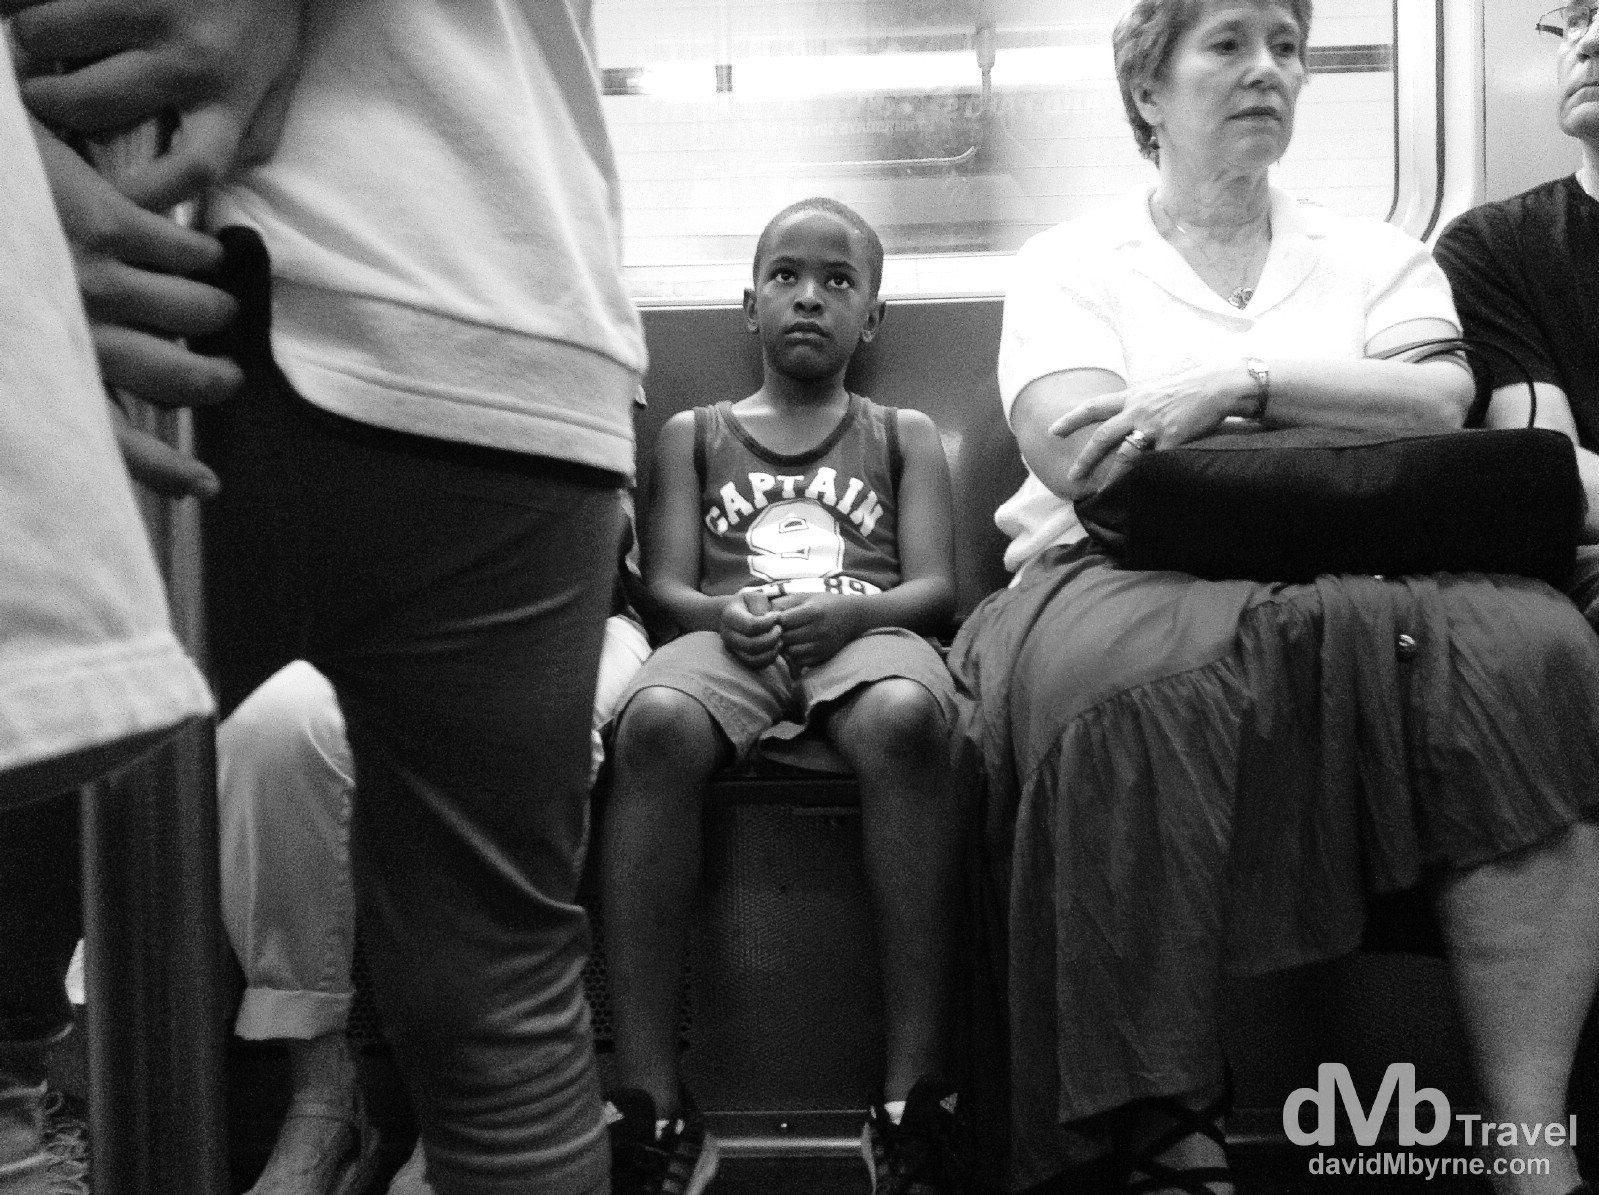 Riding the subway in New York City. July 13th 2013. (iPod)